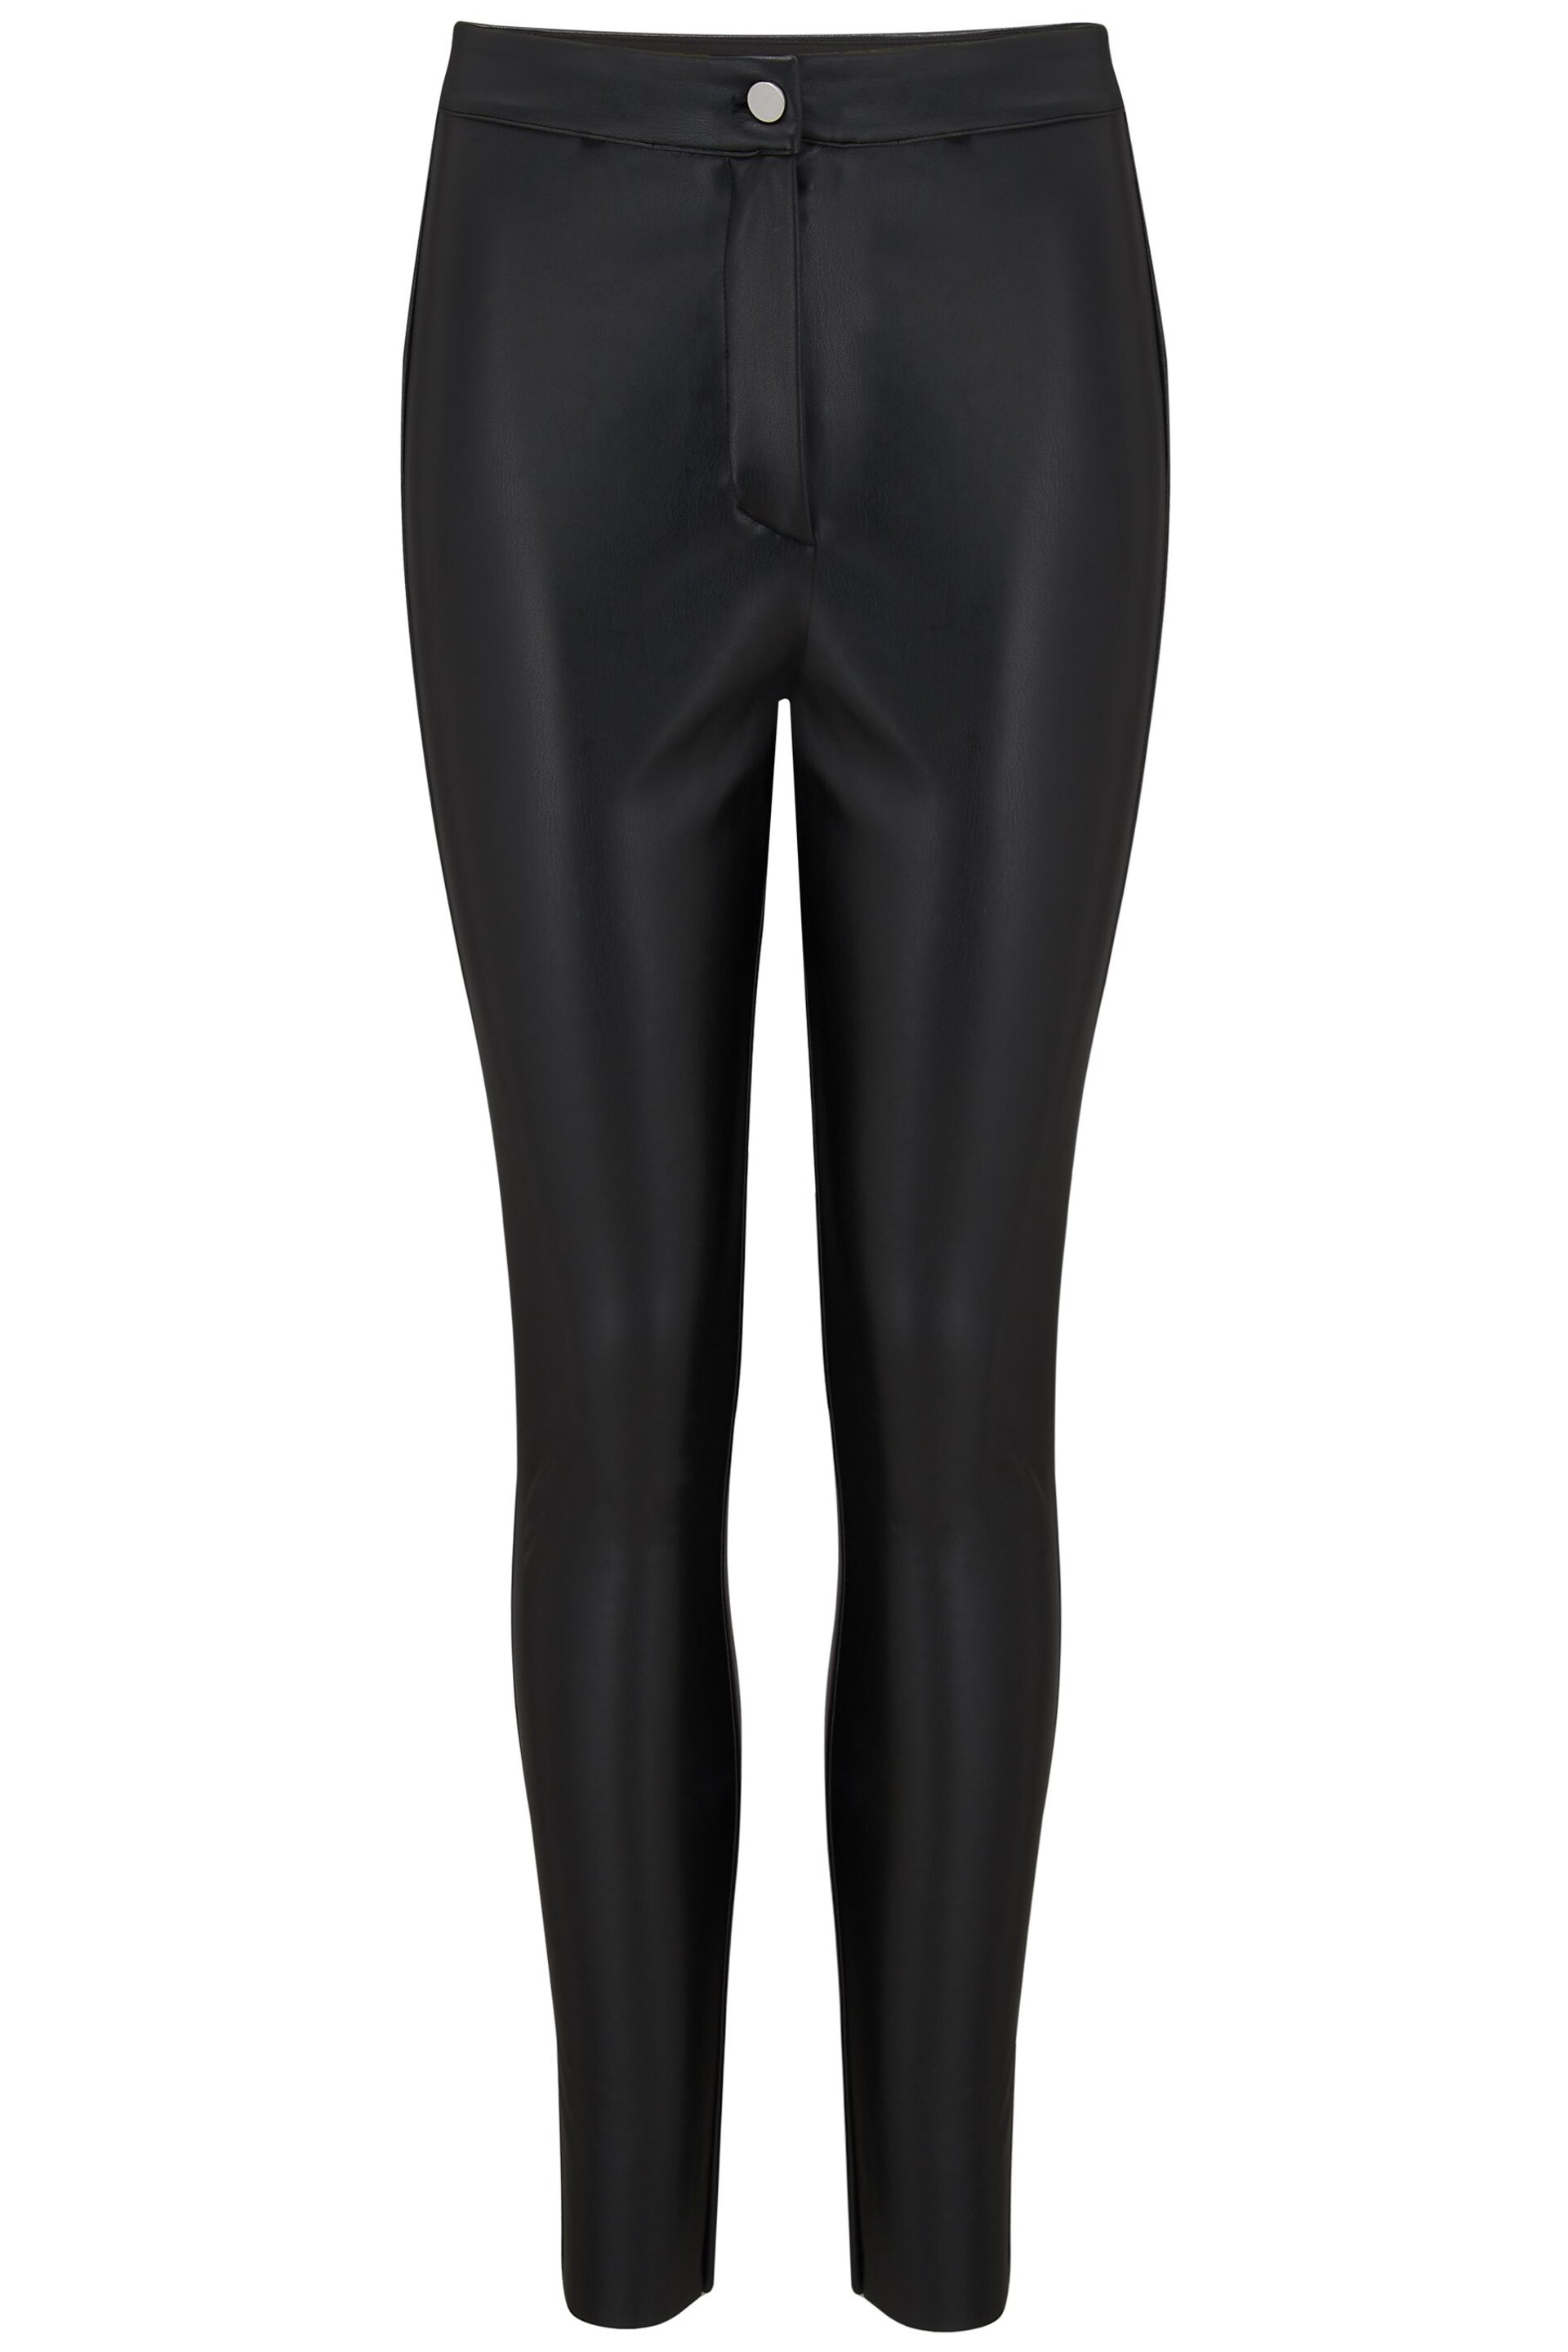 Pour Moi Black Elise Stretch Faux Leather Skinny Trouser - Image 2 of 3